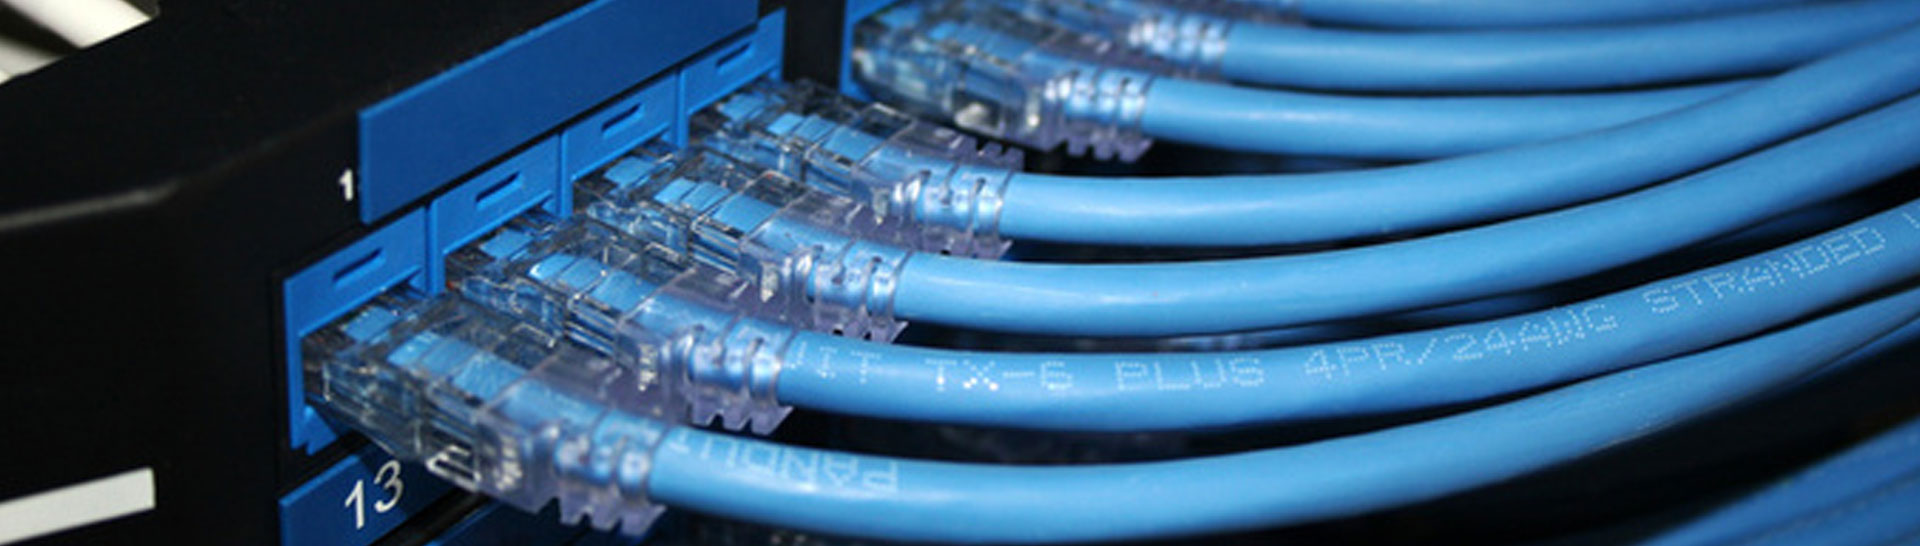 Cabling and Network Support